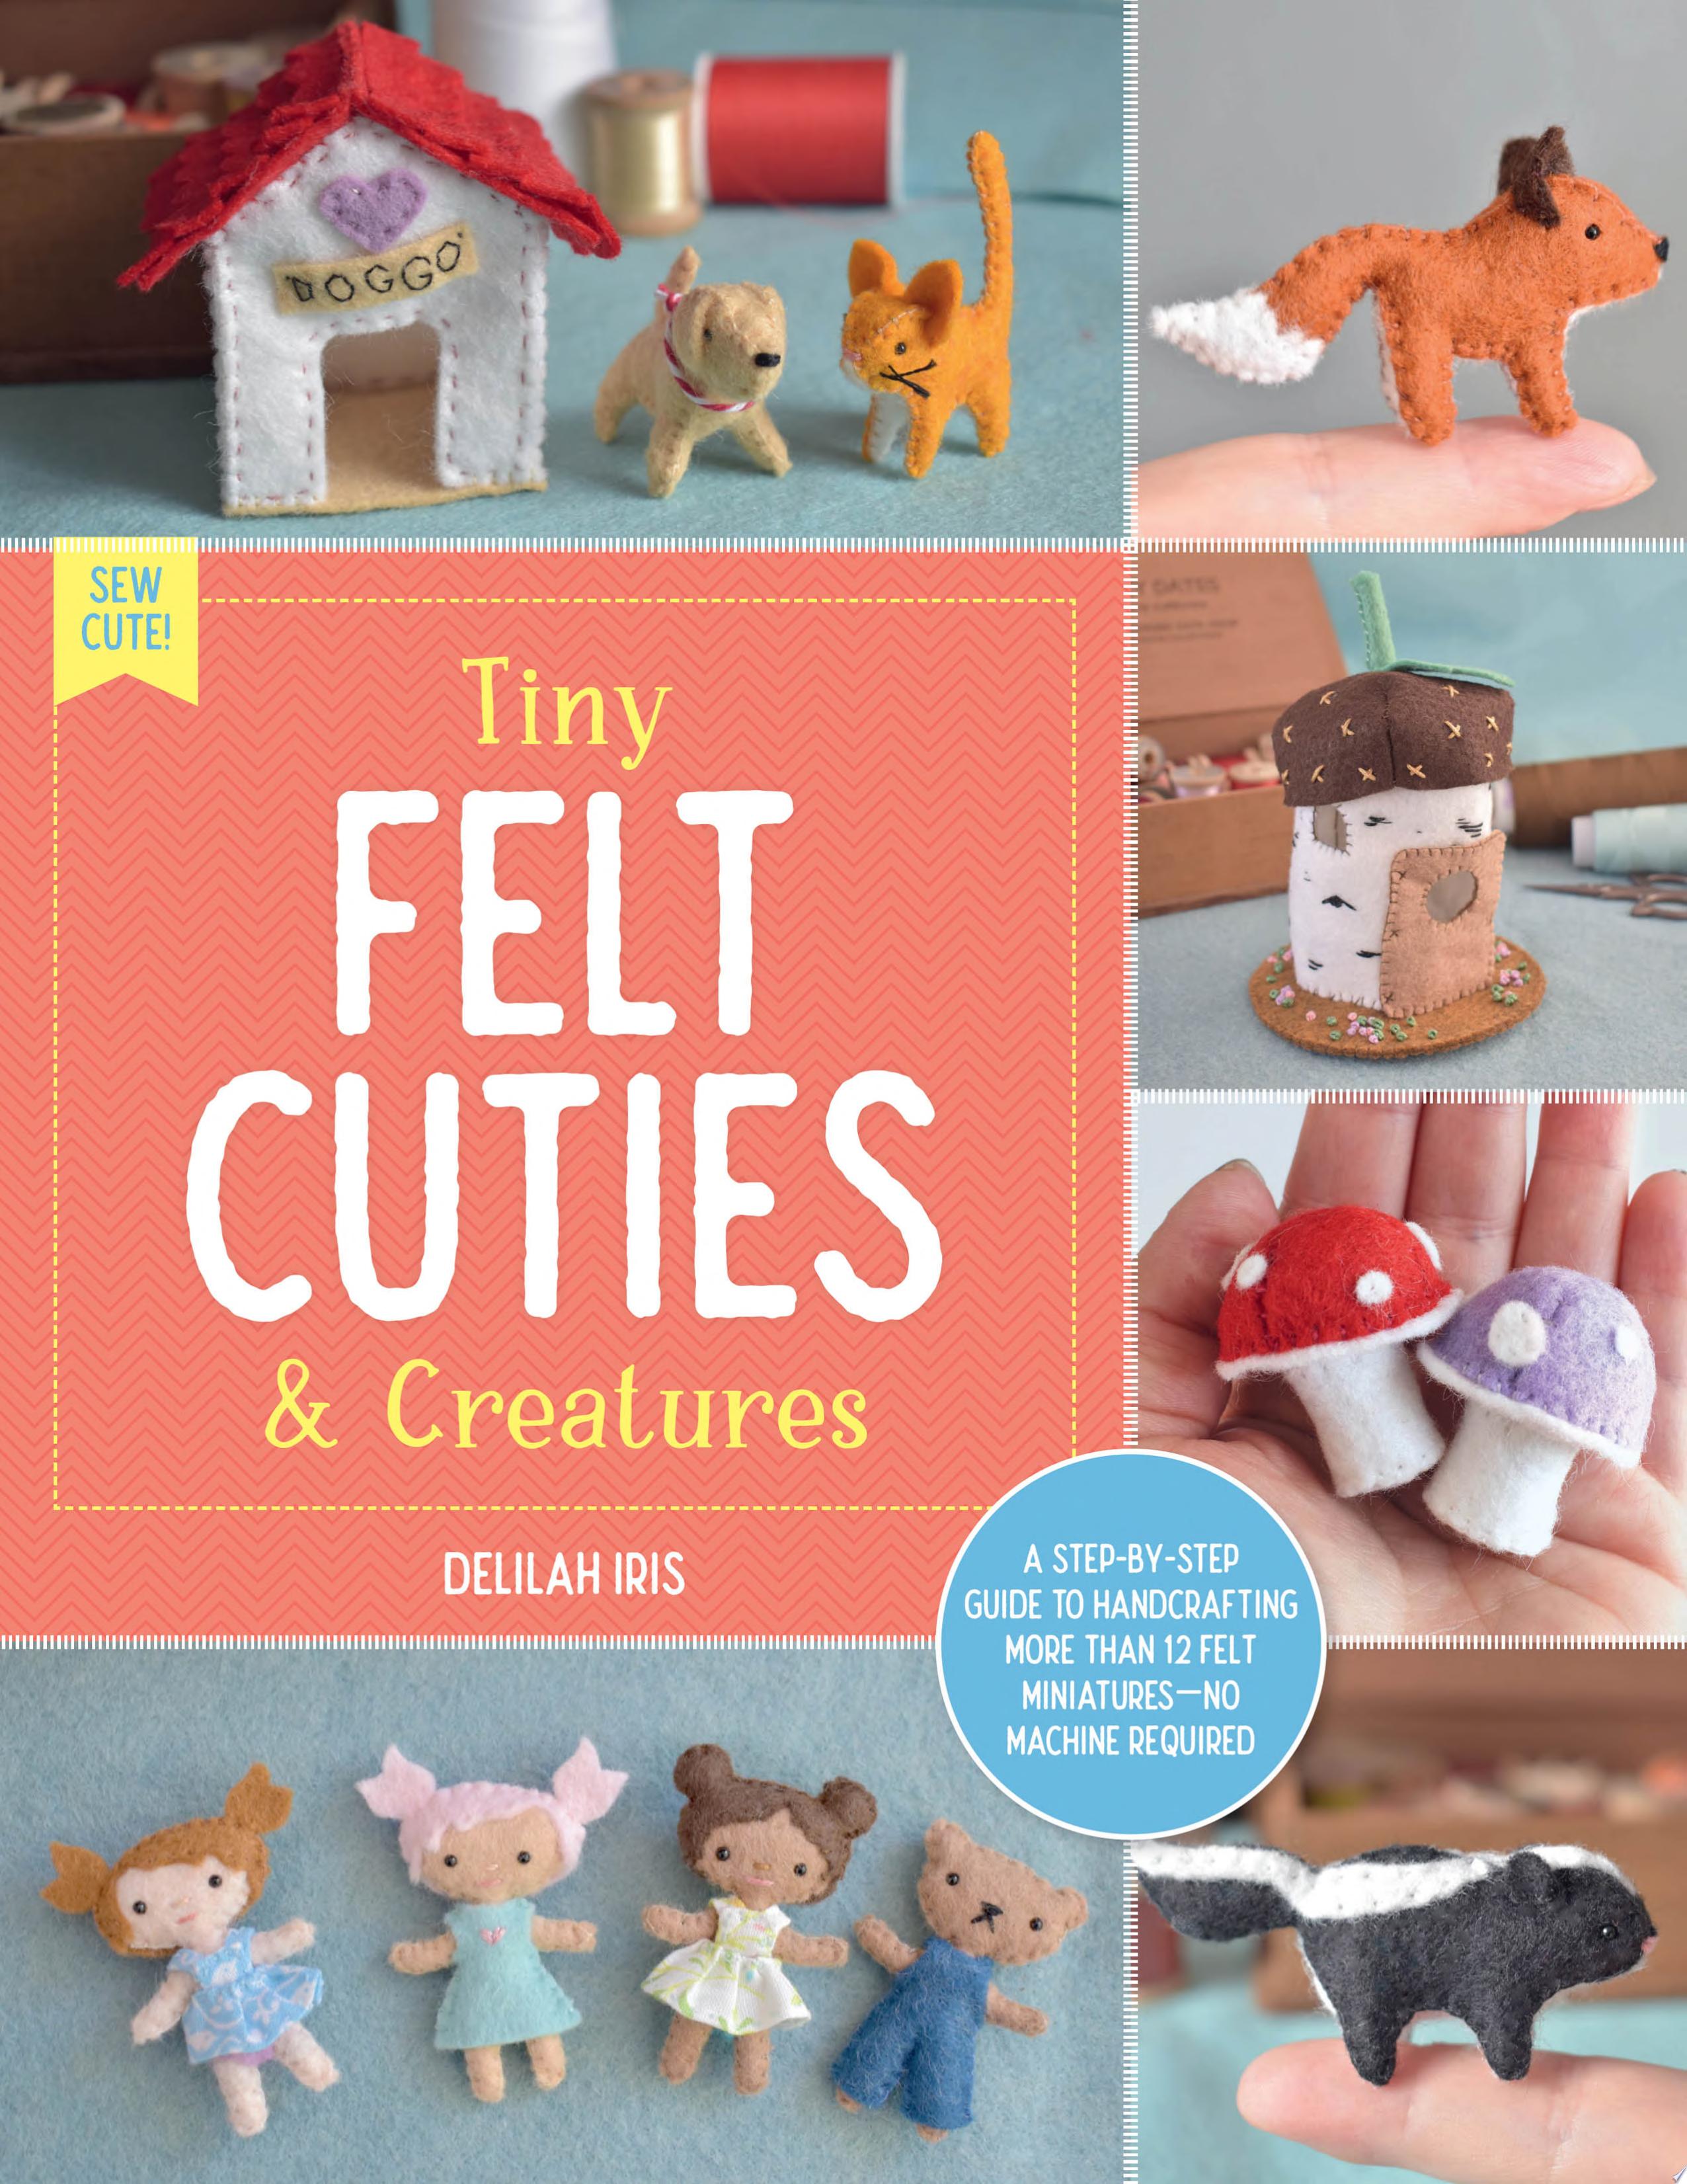 Image for "Tiny Felt Cuties & Creatures"